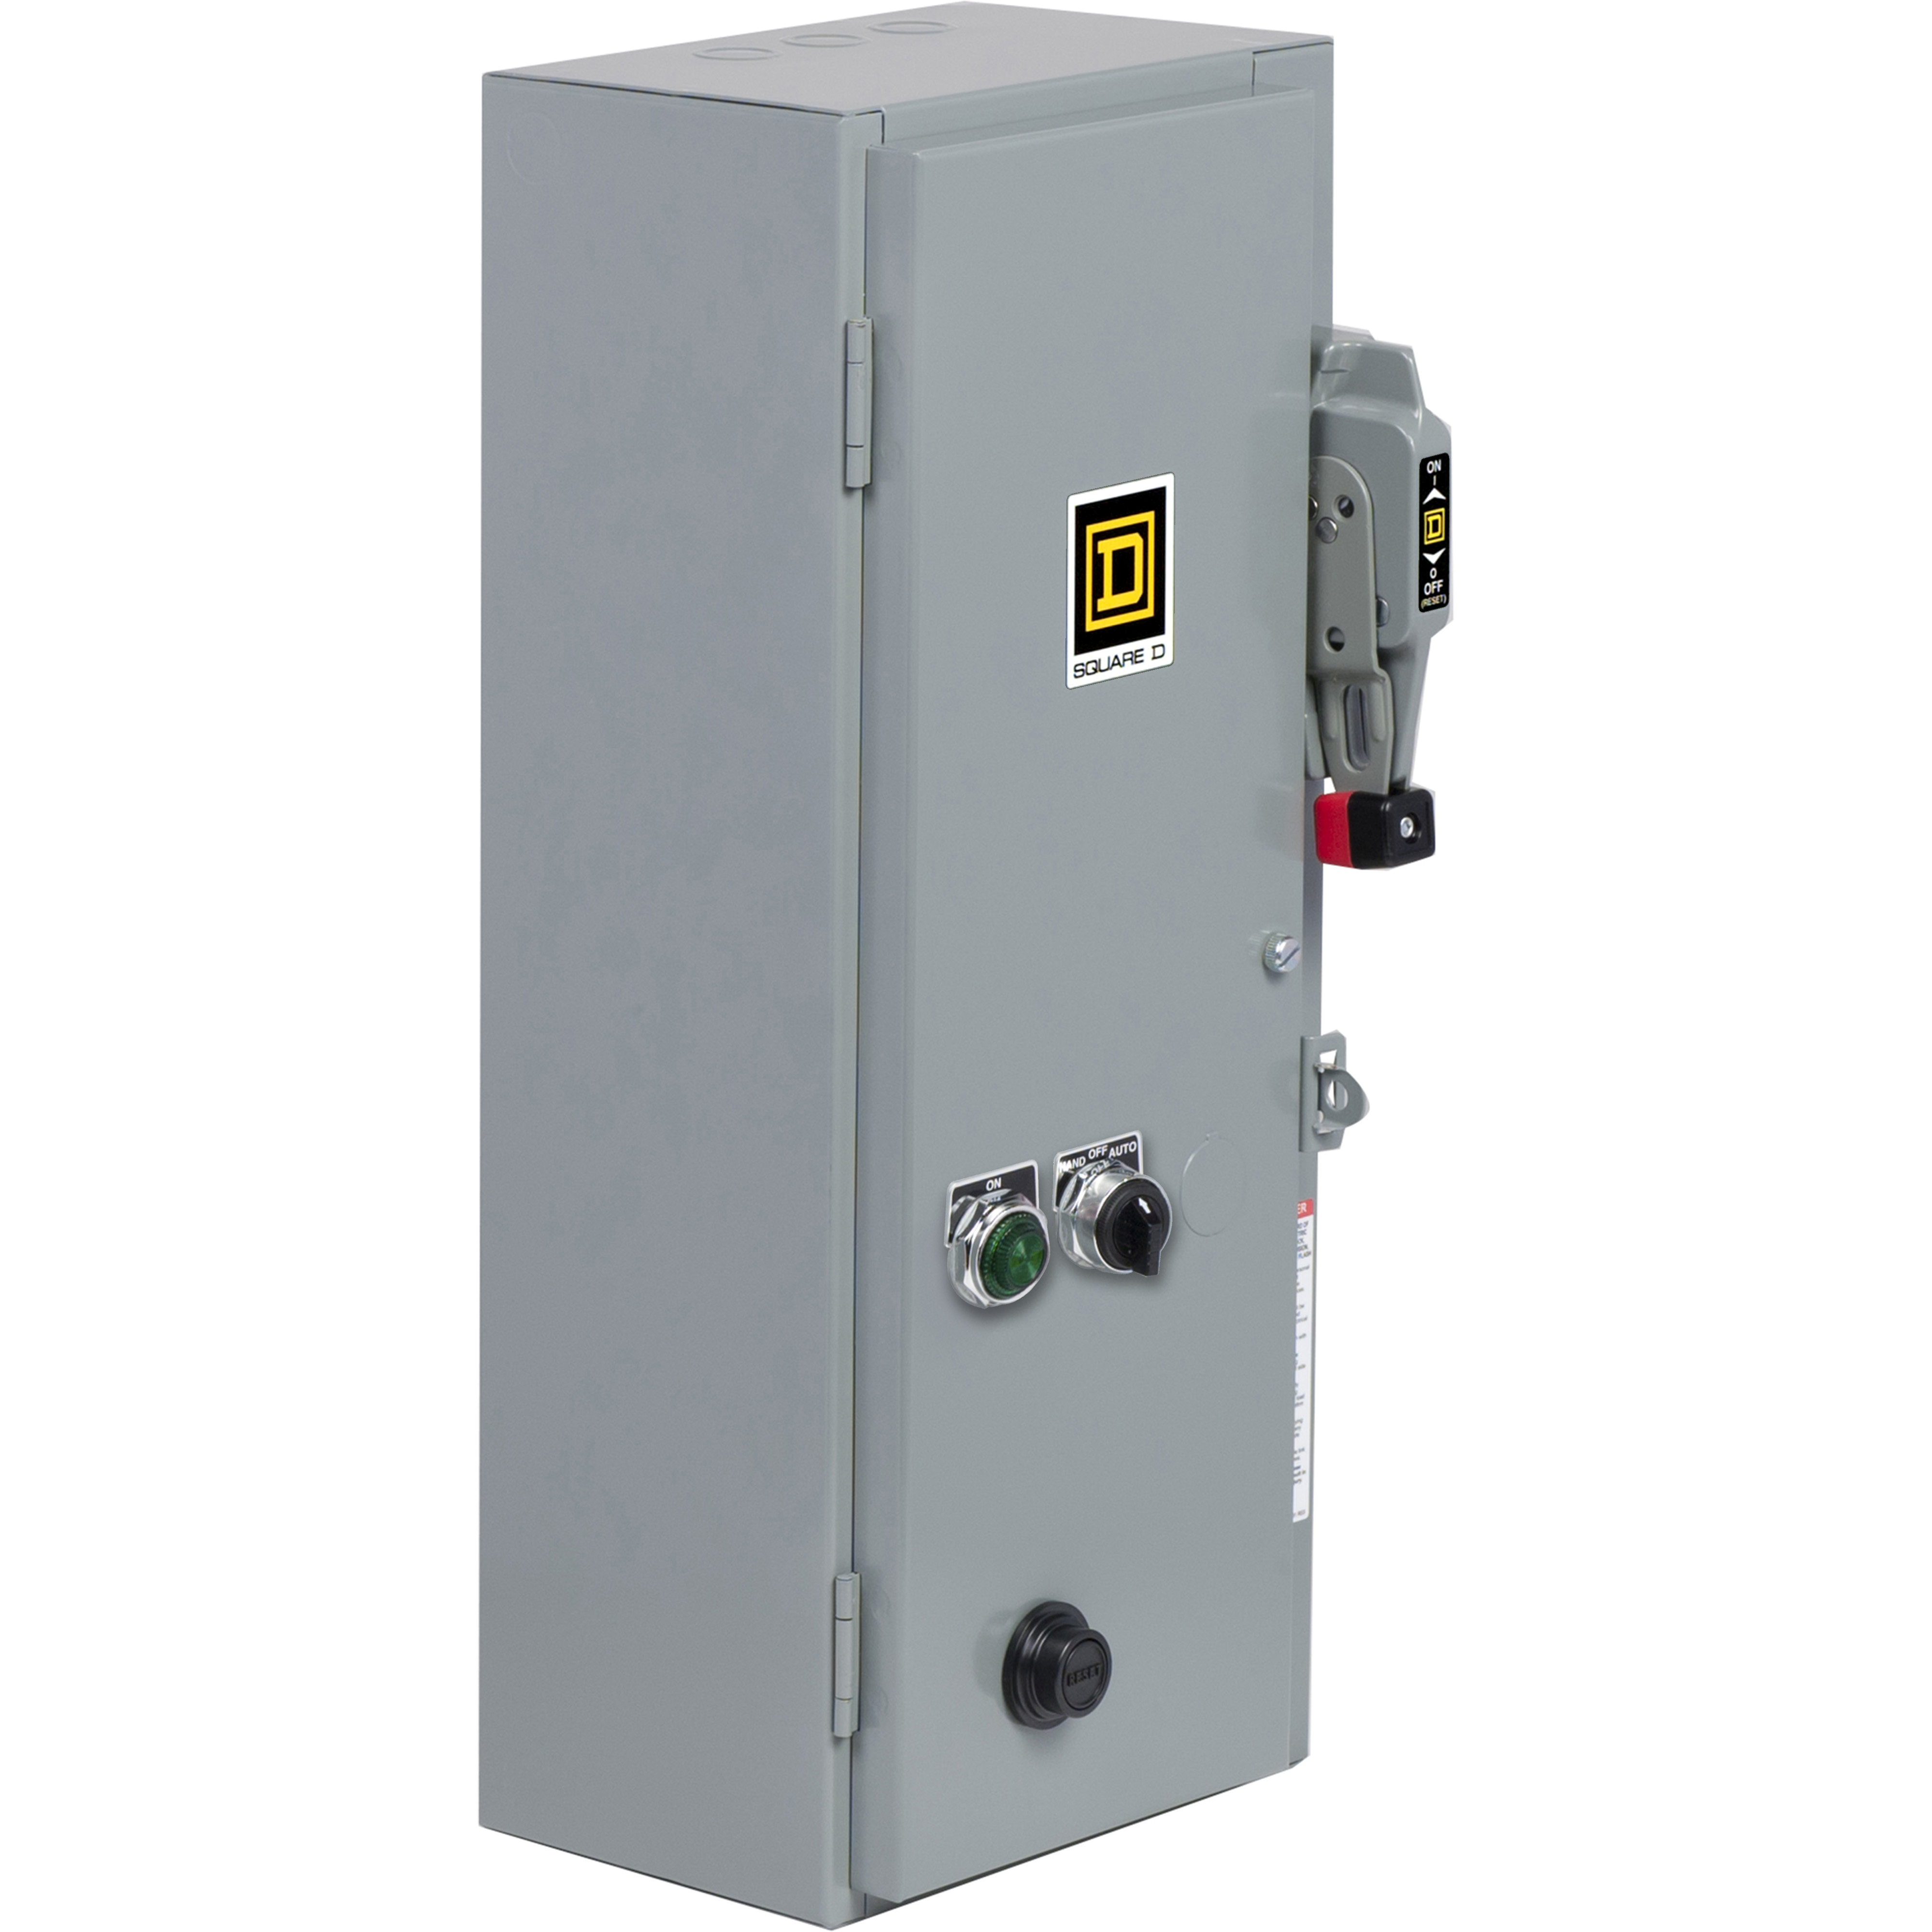 NEMA Combination Starter, Type S, 30A fusible disconnect, Size 0, 18A, 1 HP at 120 VAC single phase, 120VAC coil, NEMA 1